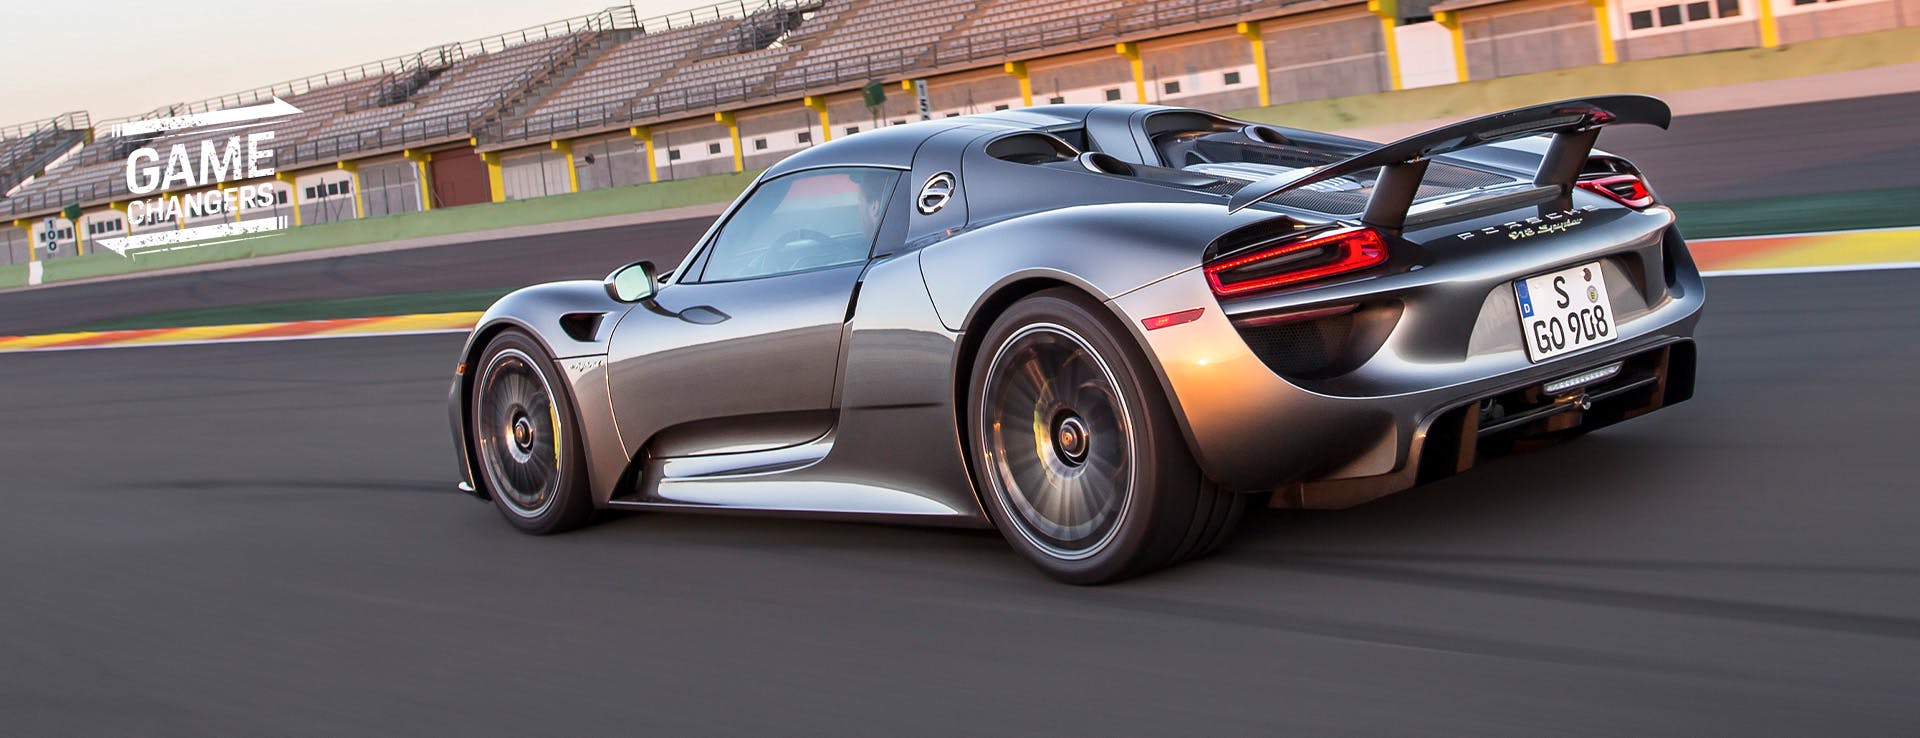 7 things you need to know about the Porsche 918 Spyder